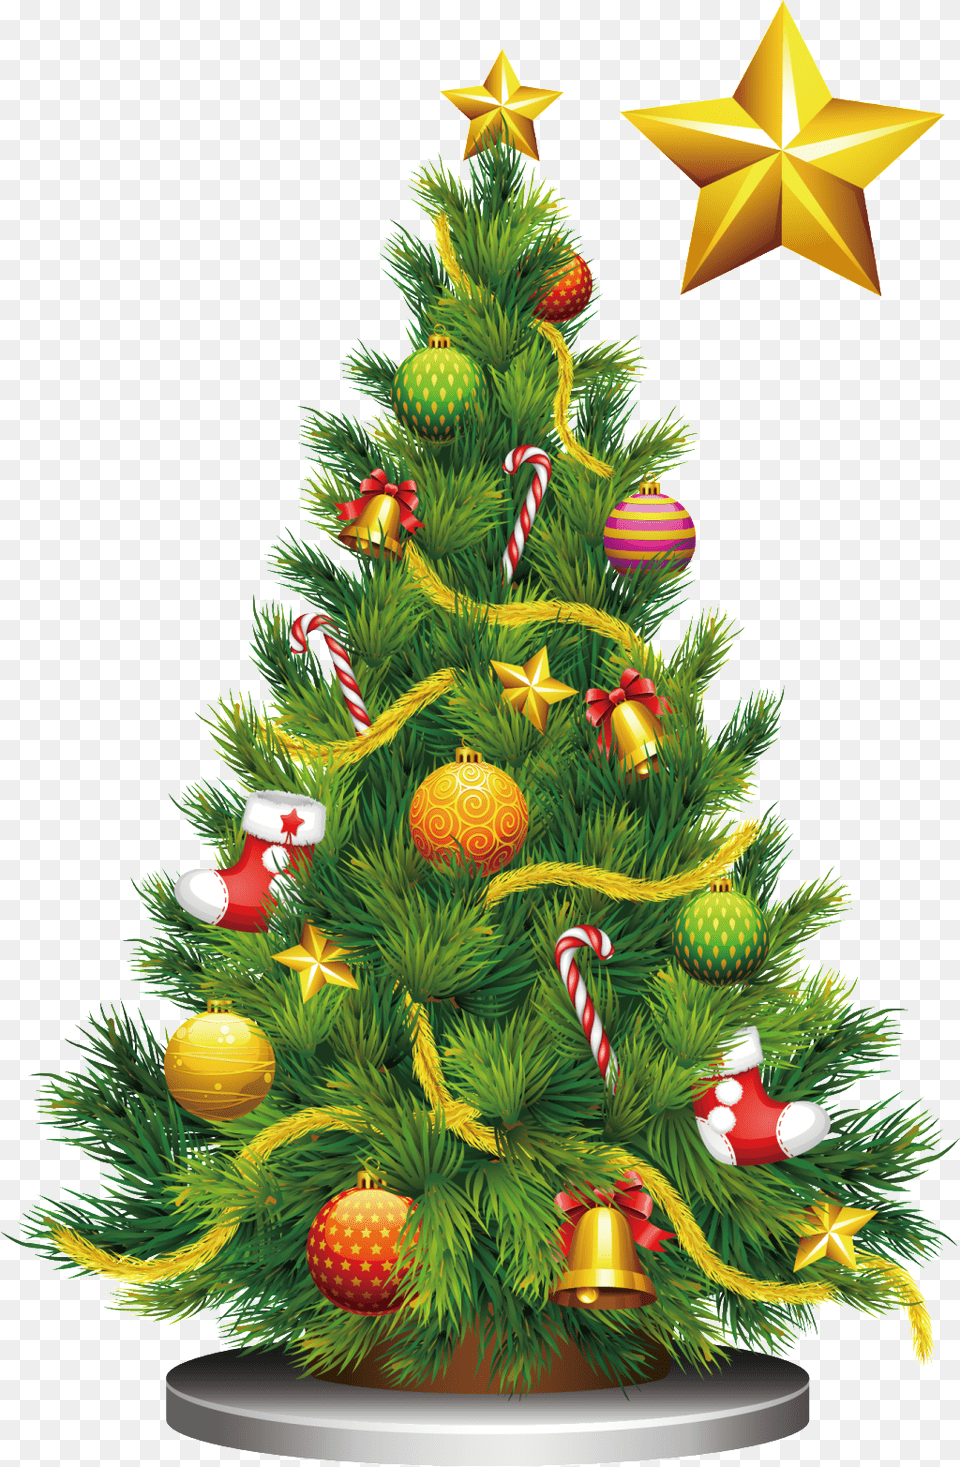 Green Christmas Tree Element Decorated Christmas Trees Illustrations, Plant, Christmas Decorations, Festival, Christmas Tree Png